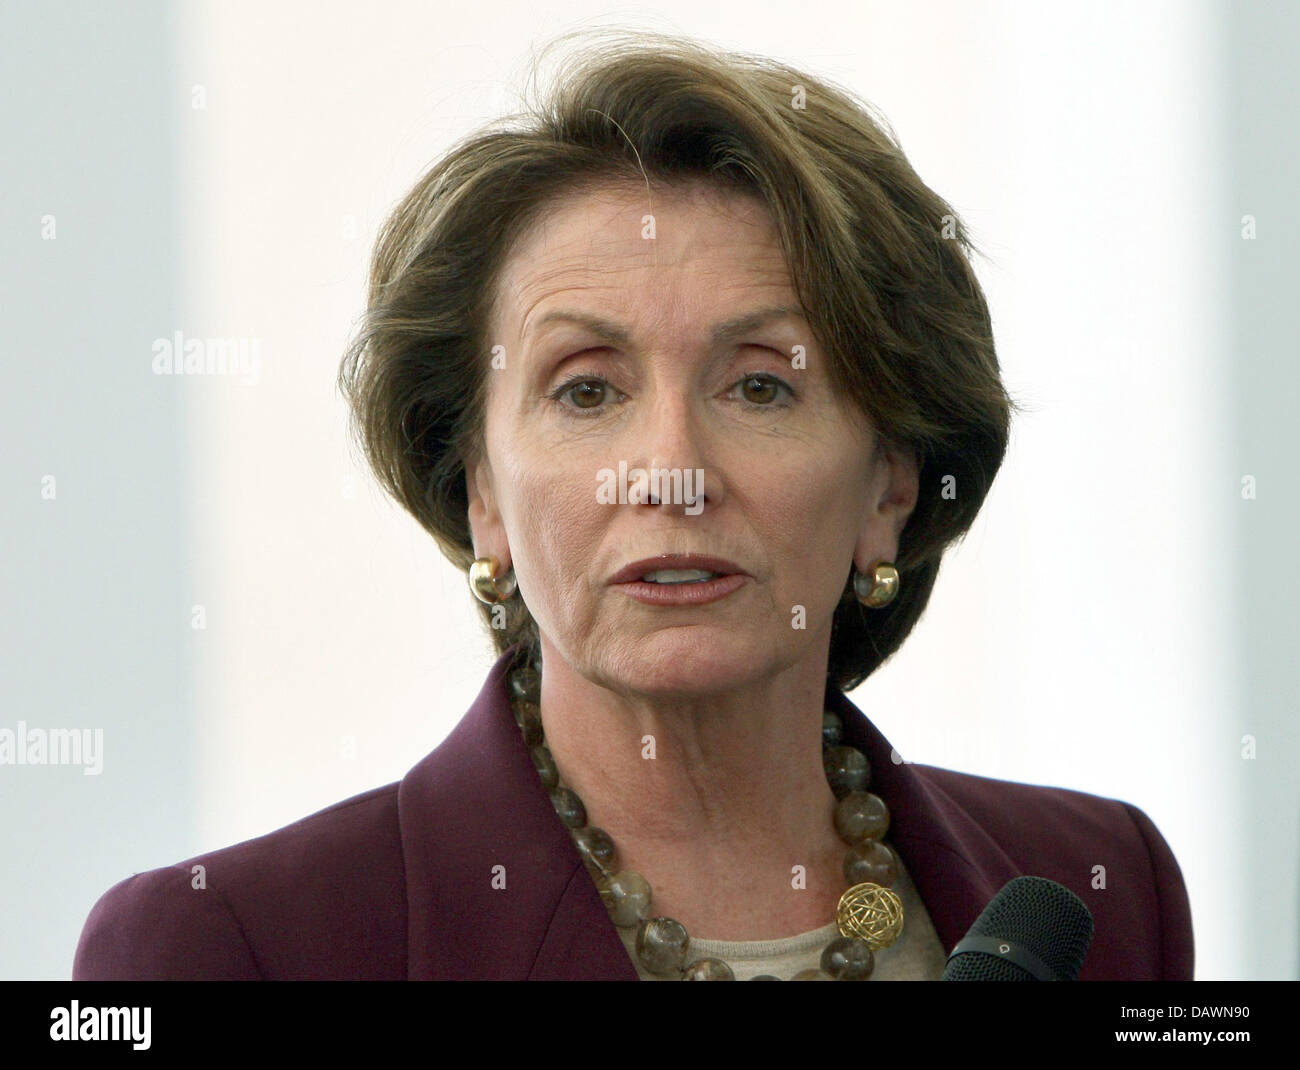 Speaker of the US Congress Nancy Pelosi pictured in Berlin, Germany, 29 May 2007. Photo: Peer Grimm Stock Photo